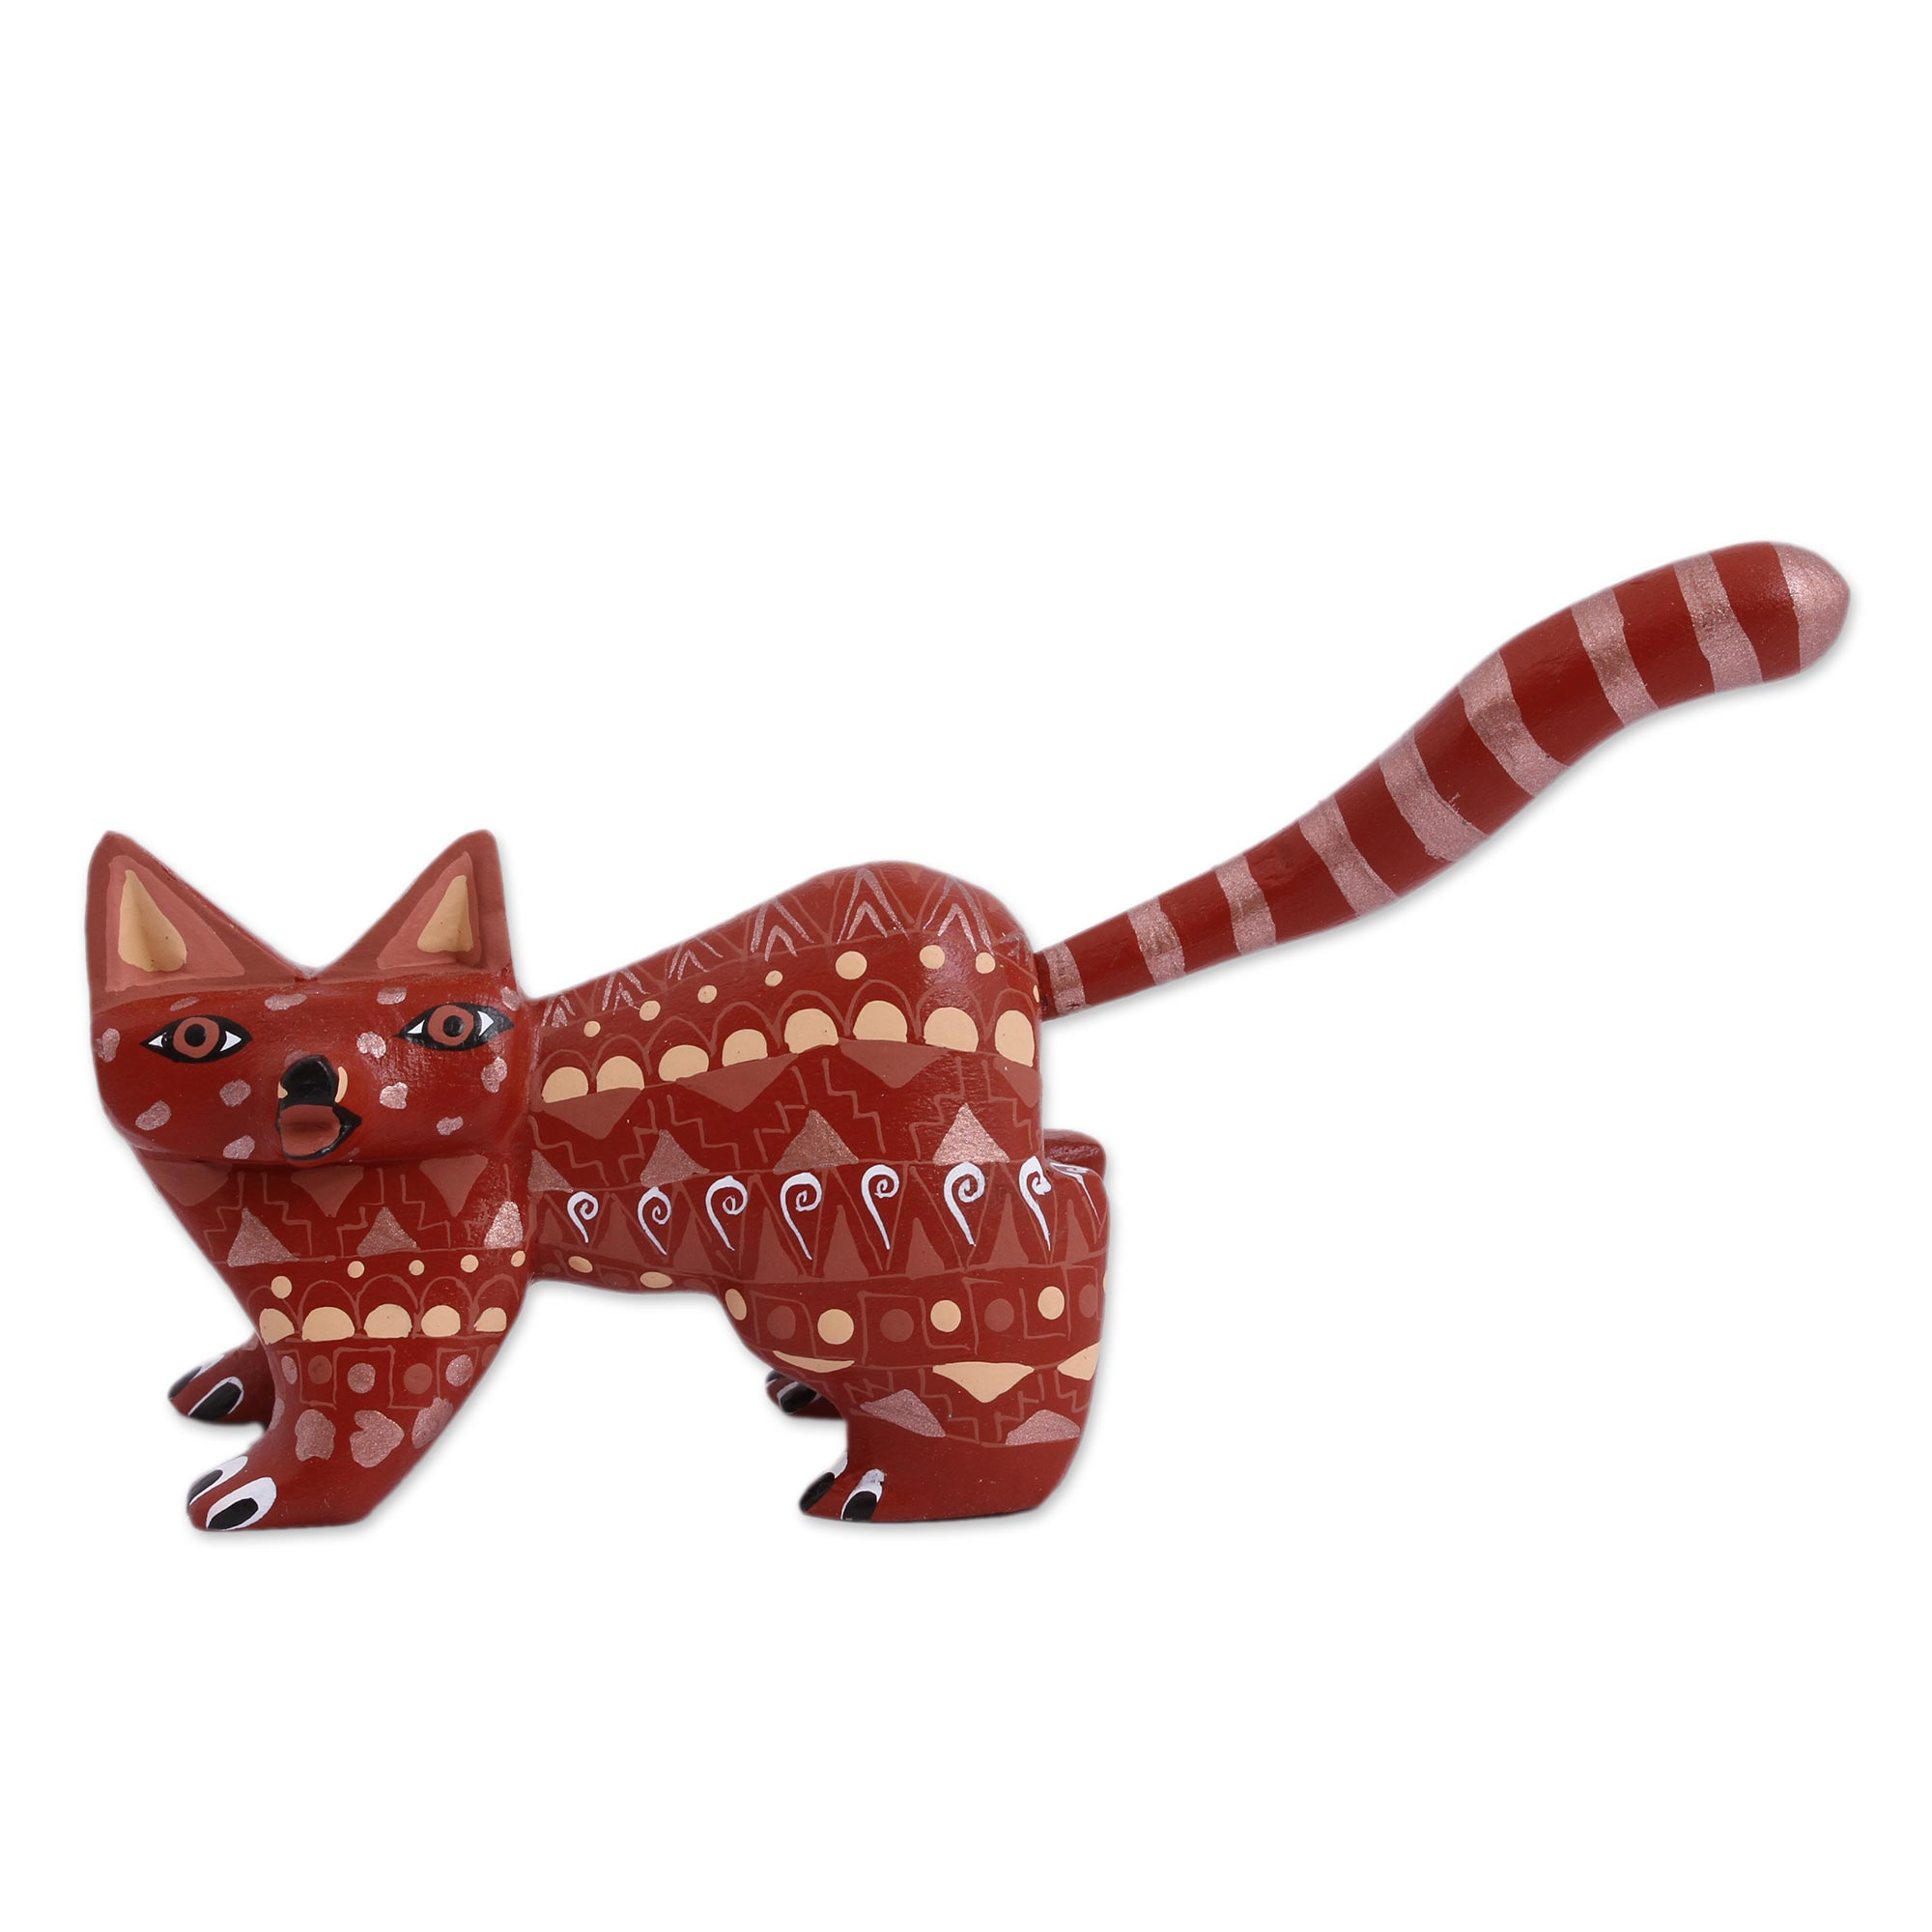 UNICEF Market  Wood Alebrije Cat Figurine in Red from Mexico